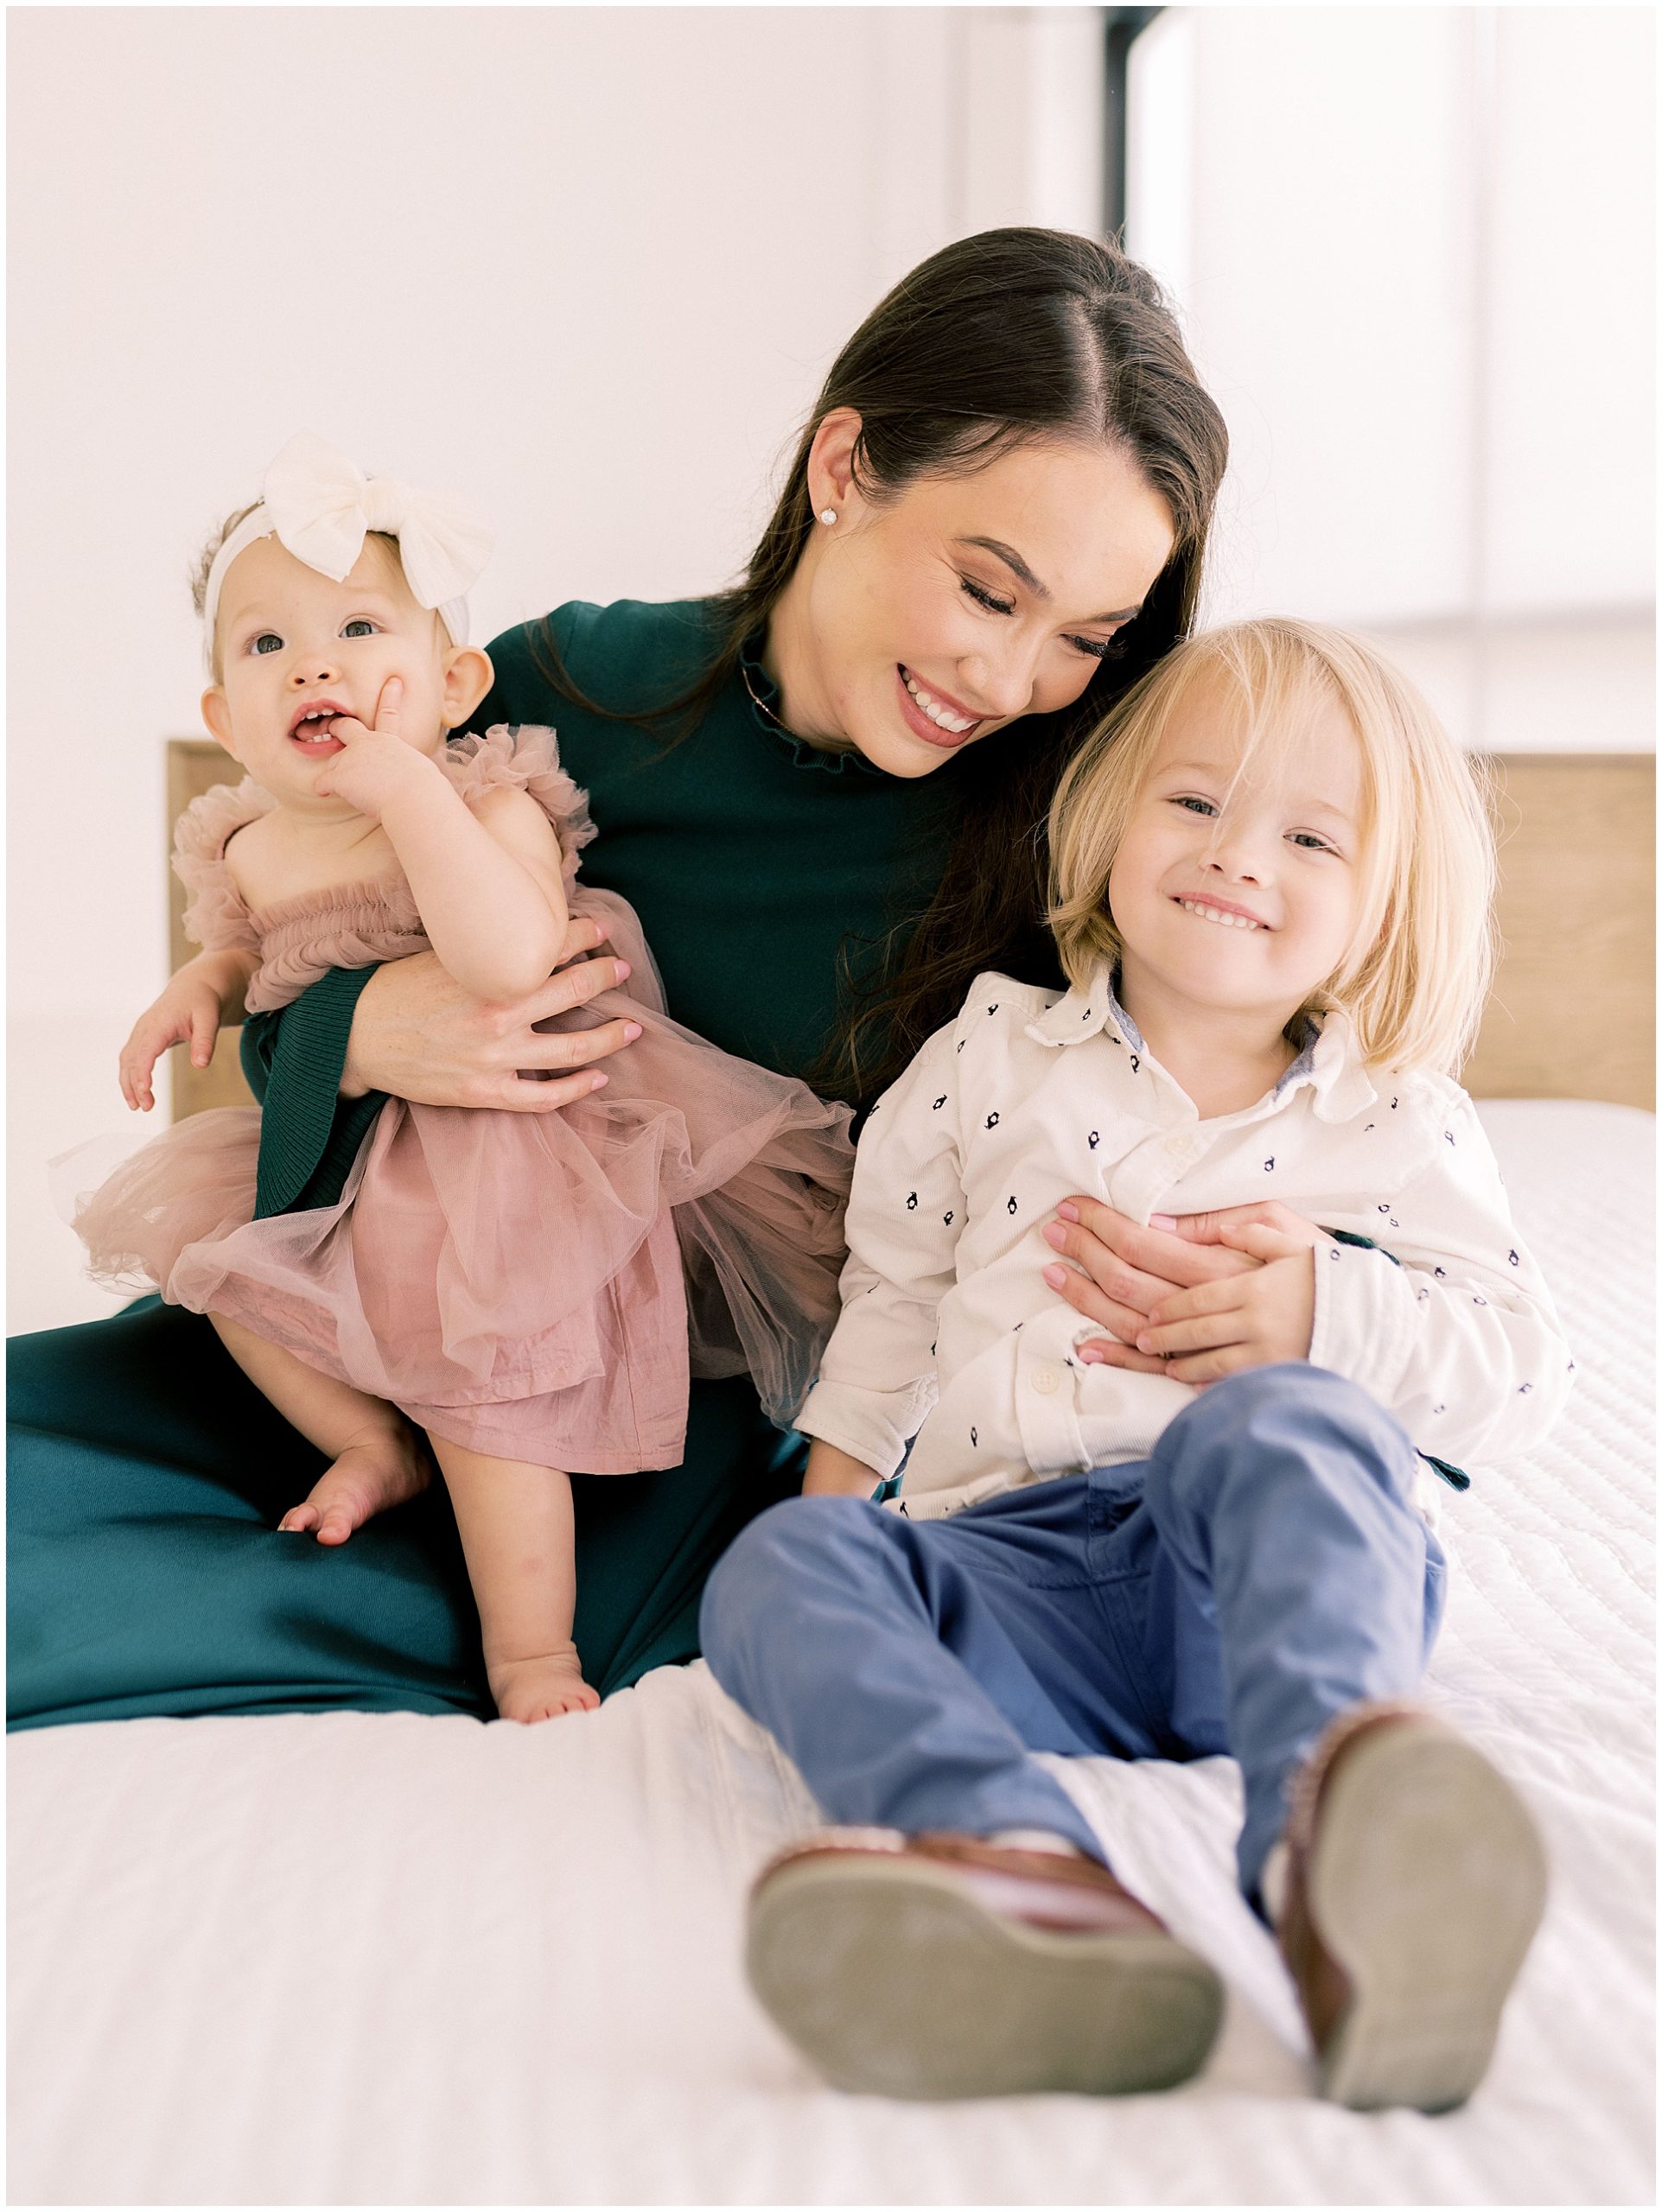 Tips to prepare for an indoor family session